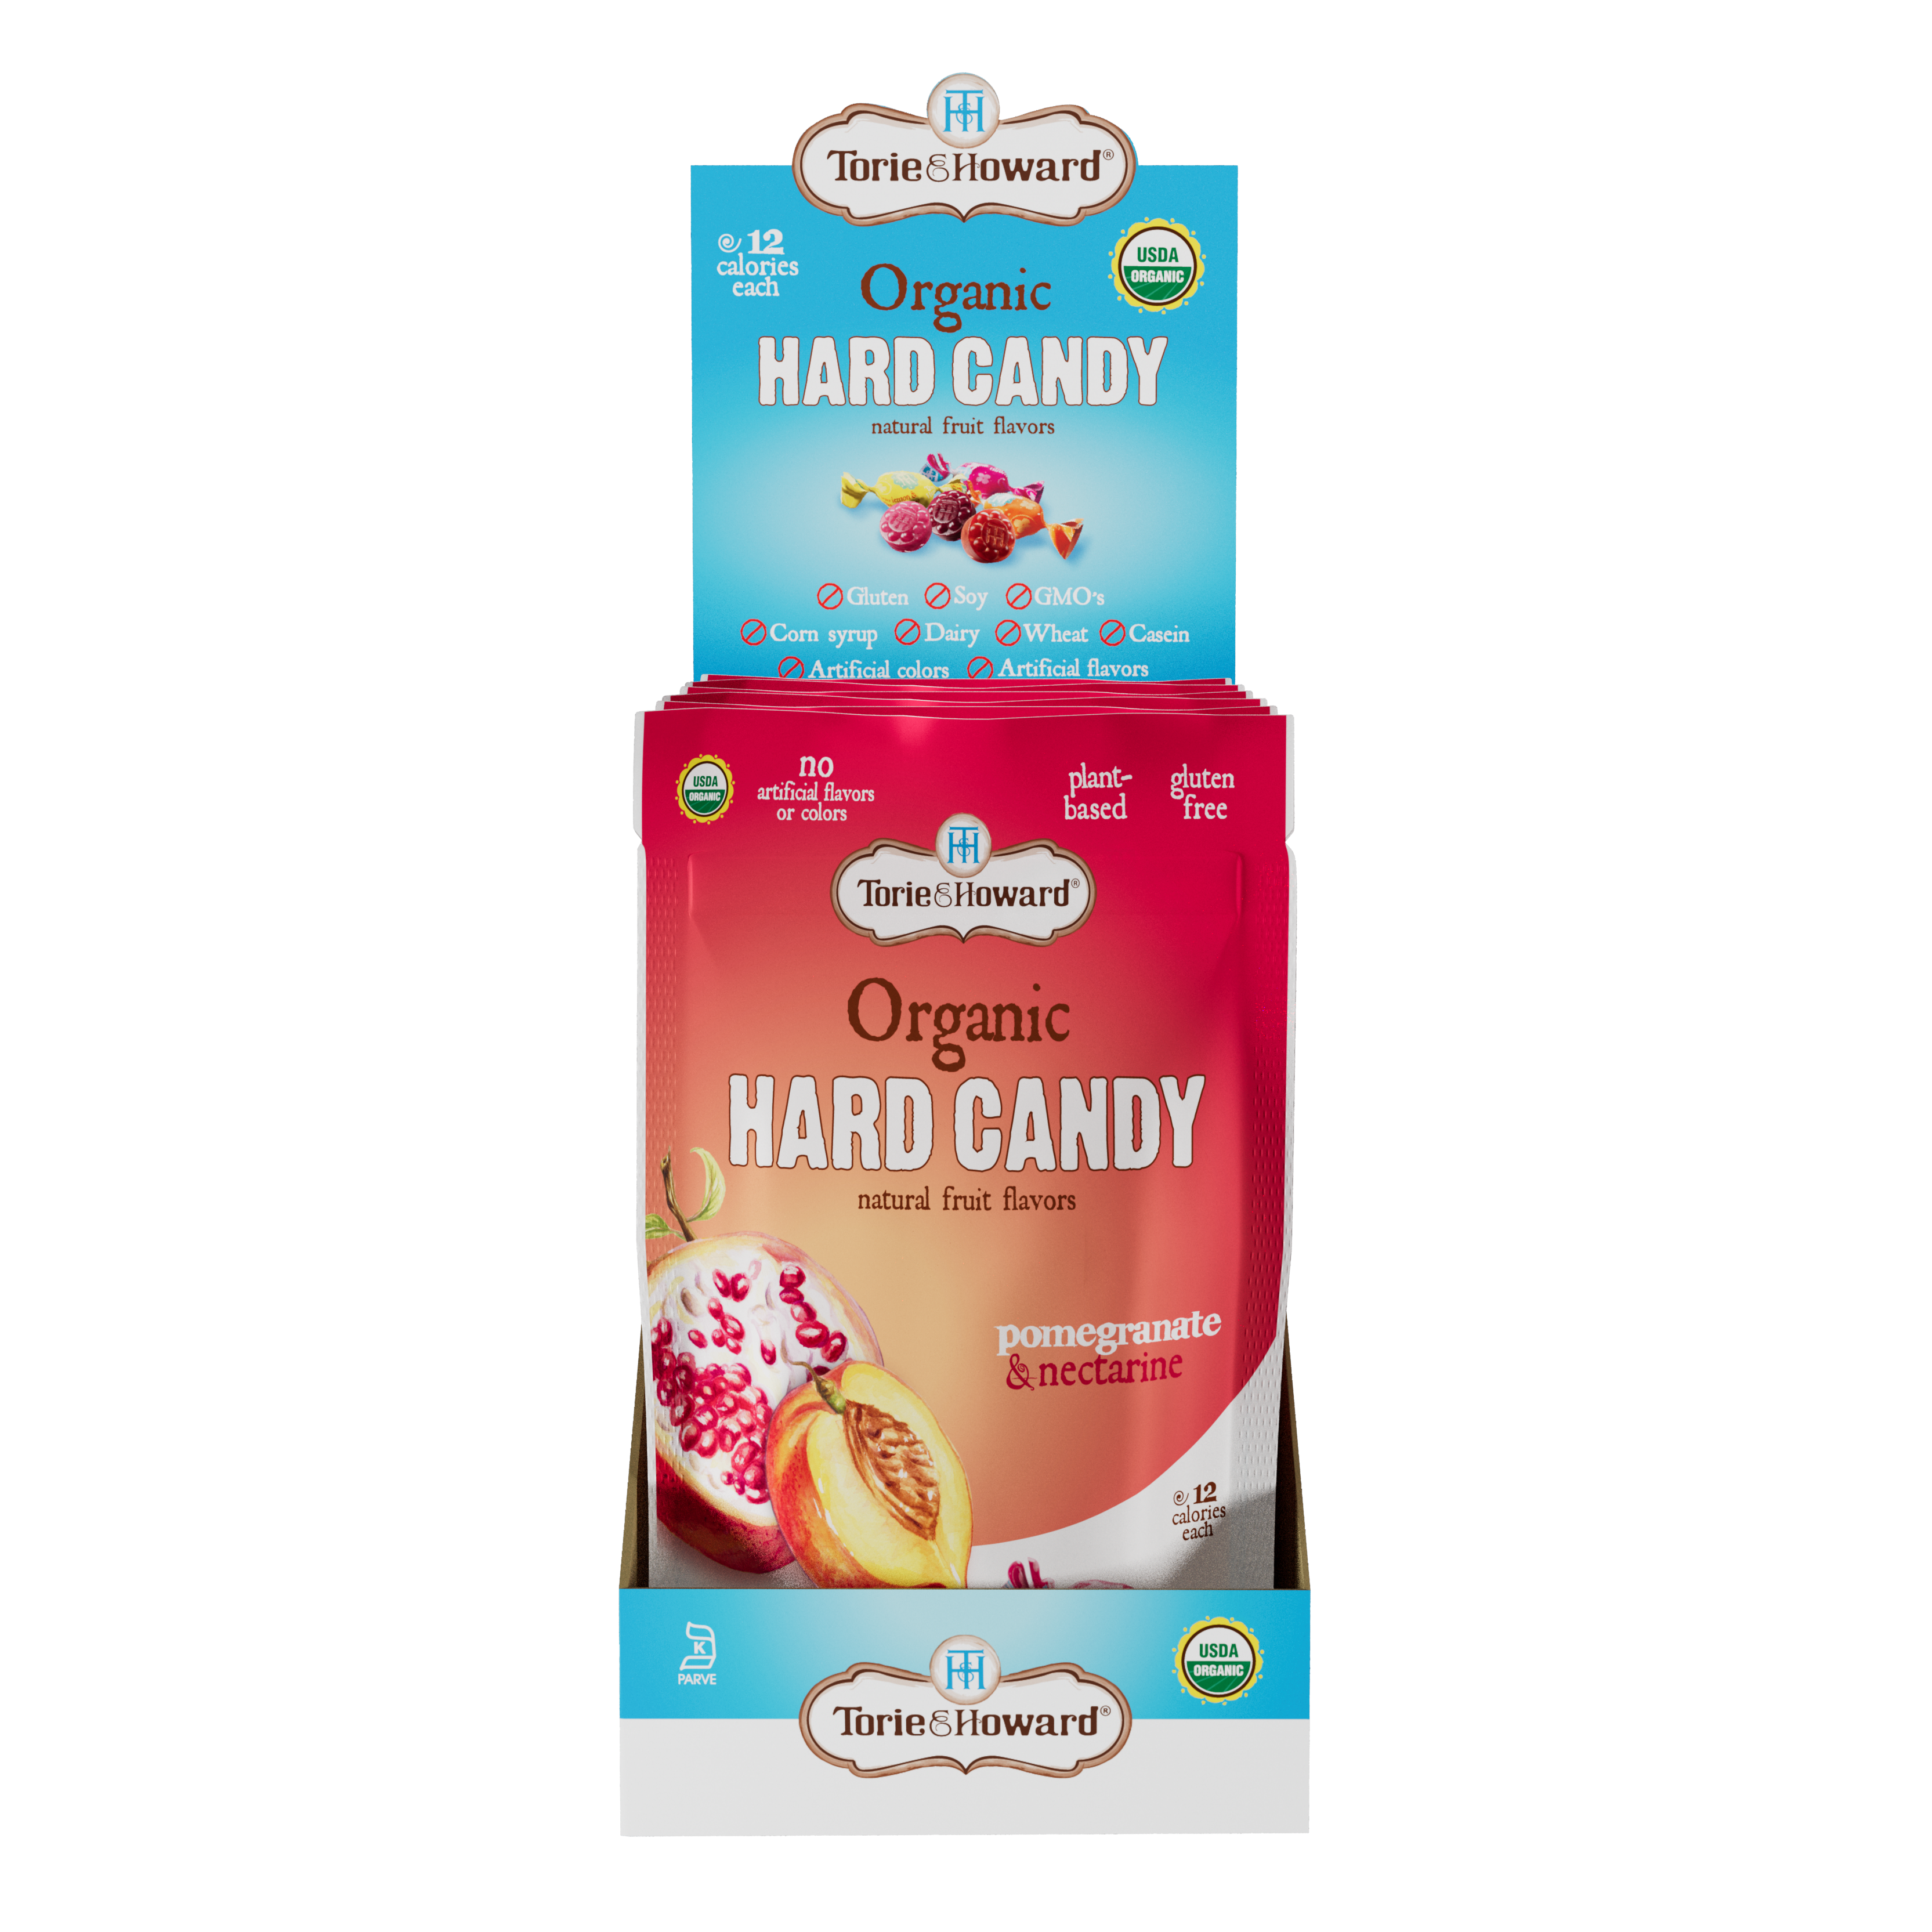 Torie & Howard Pomegranate & Nectarine Organic Hard Candy 3.5oz Stand Up Bags